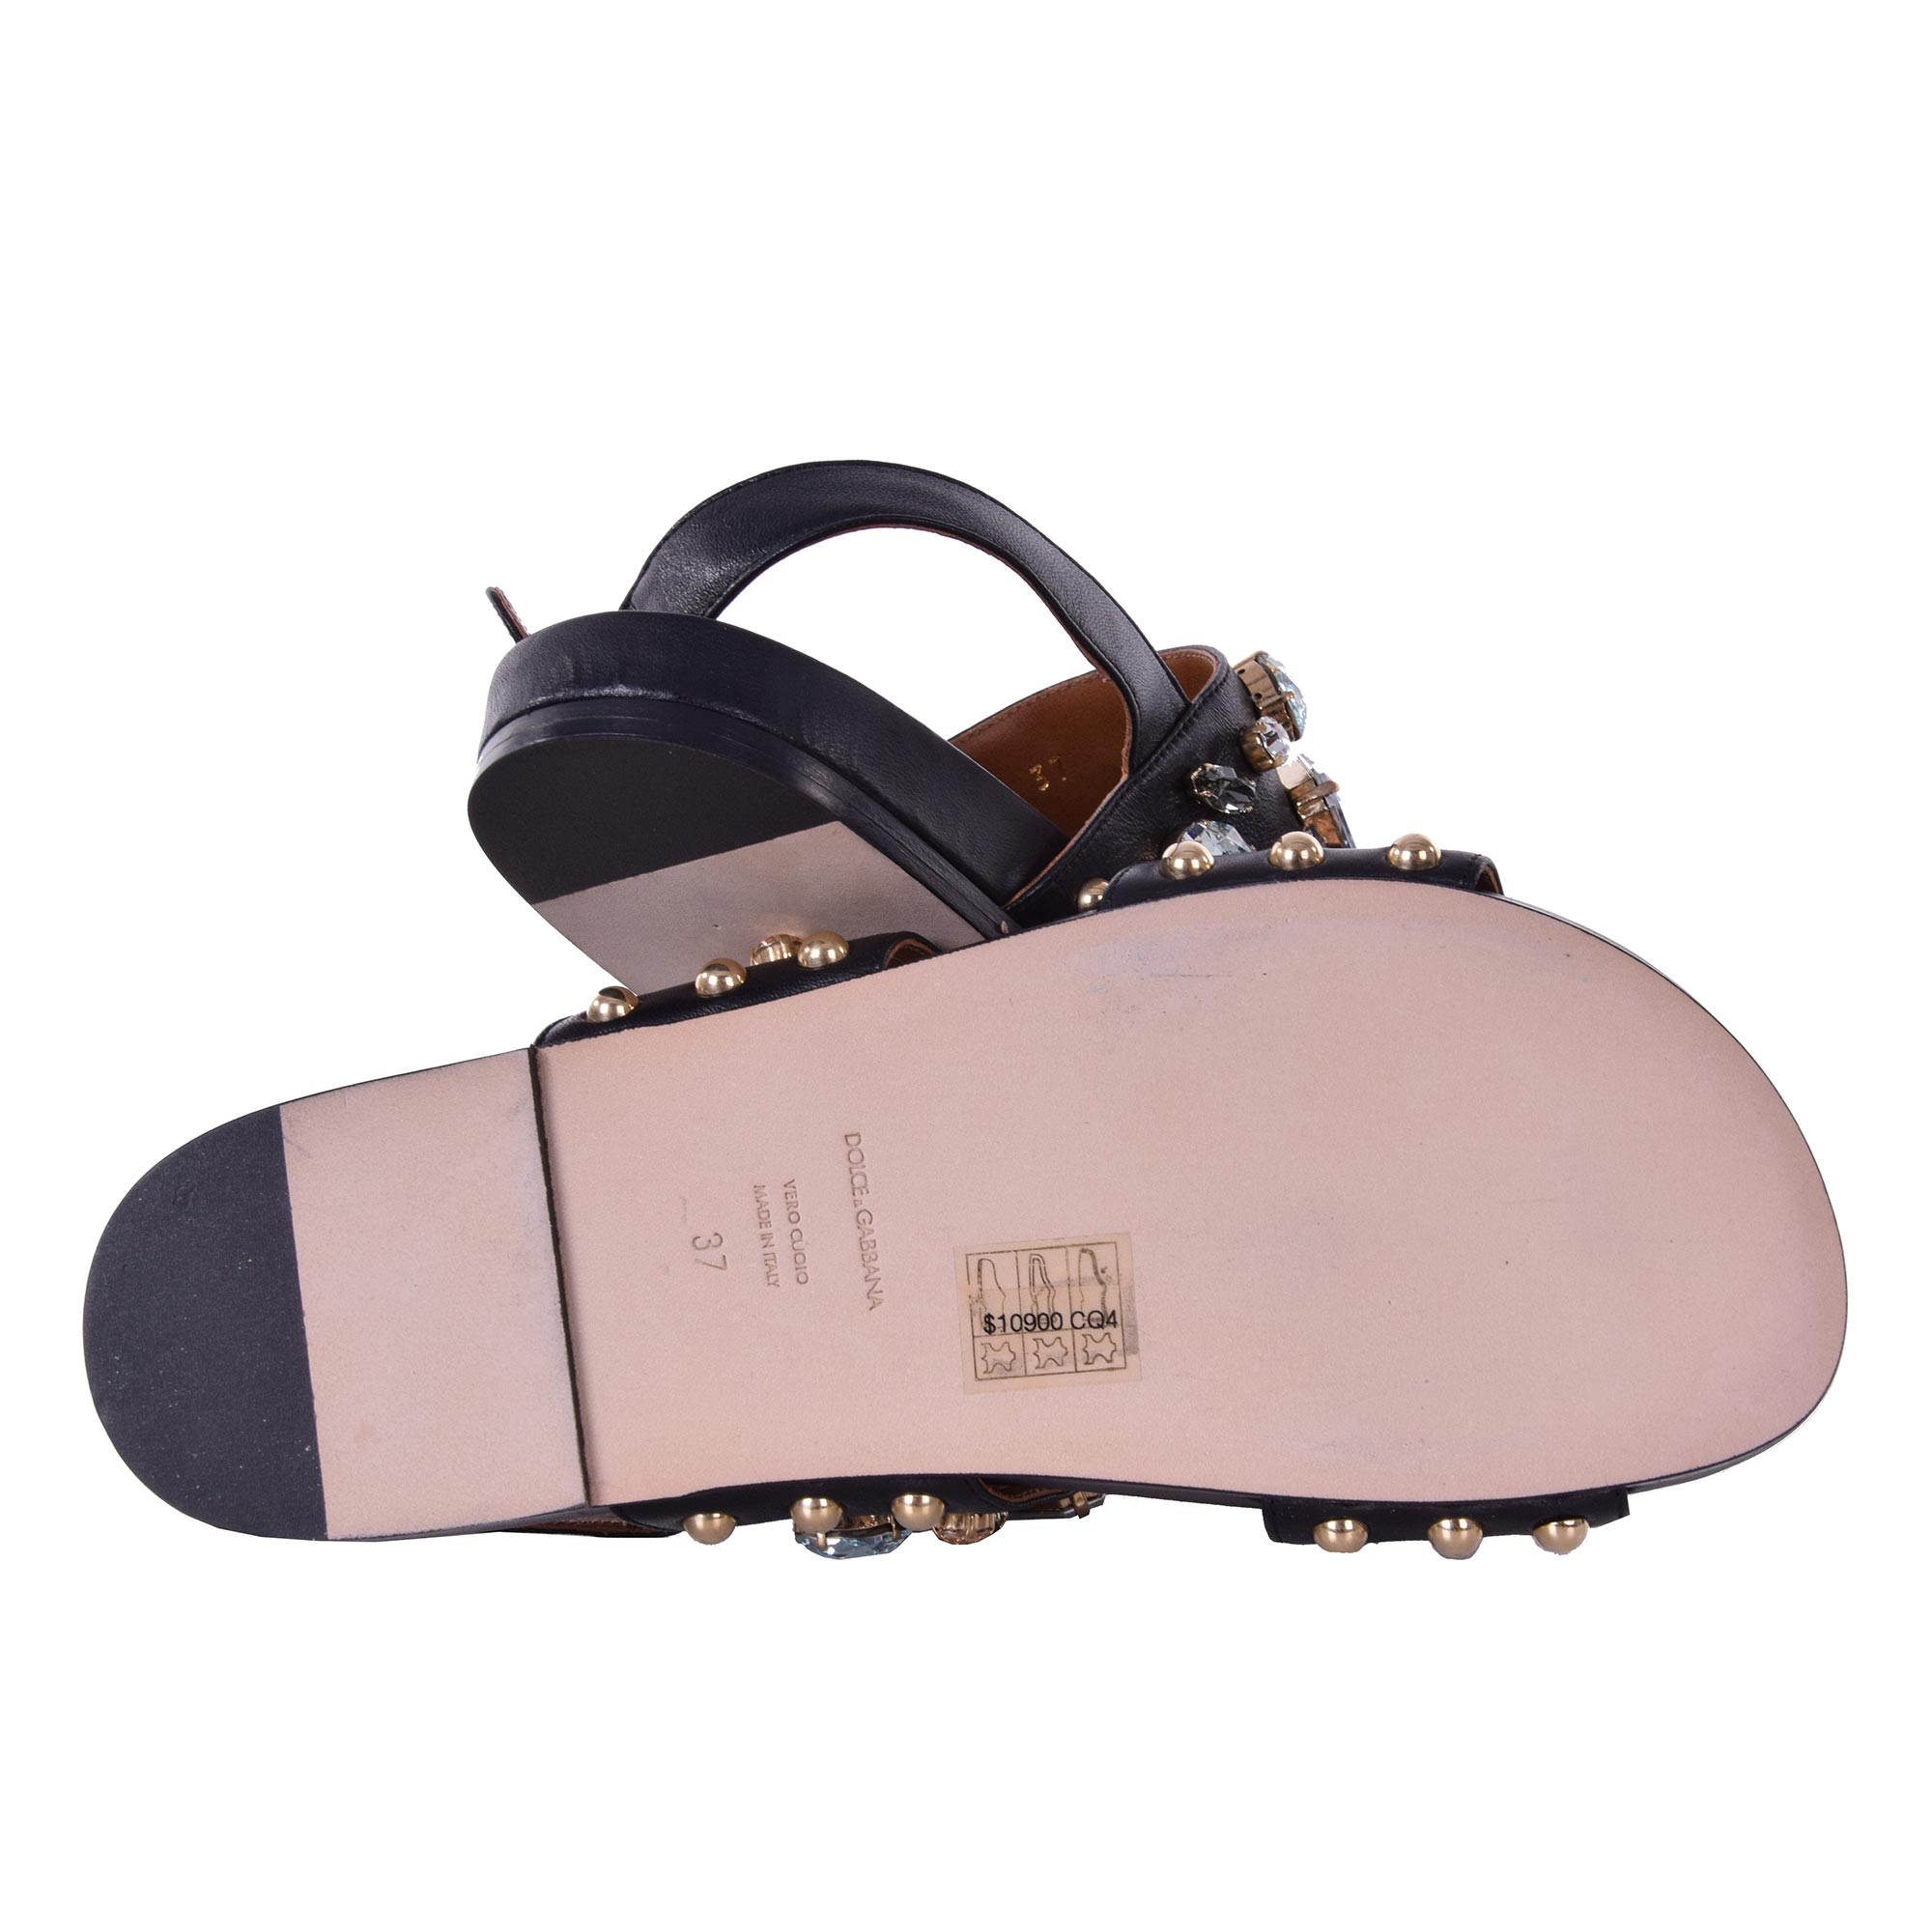 D&G New BOYS LEATHER THONG SANDALS SLIPPERS 31 Eur / 13 US RTL $190  LCDZI4 O124 | eBay